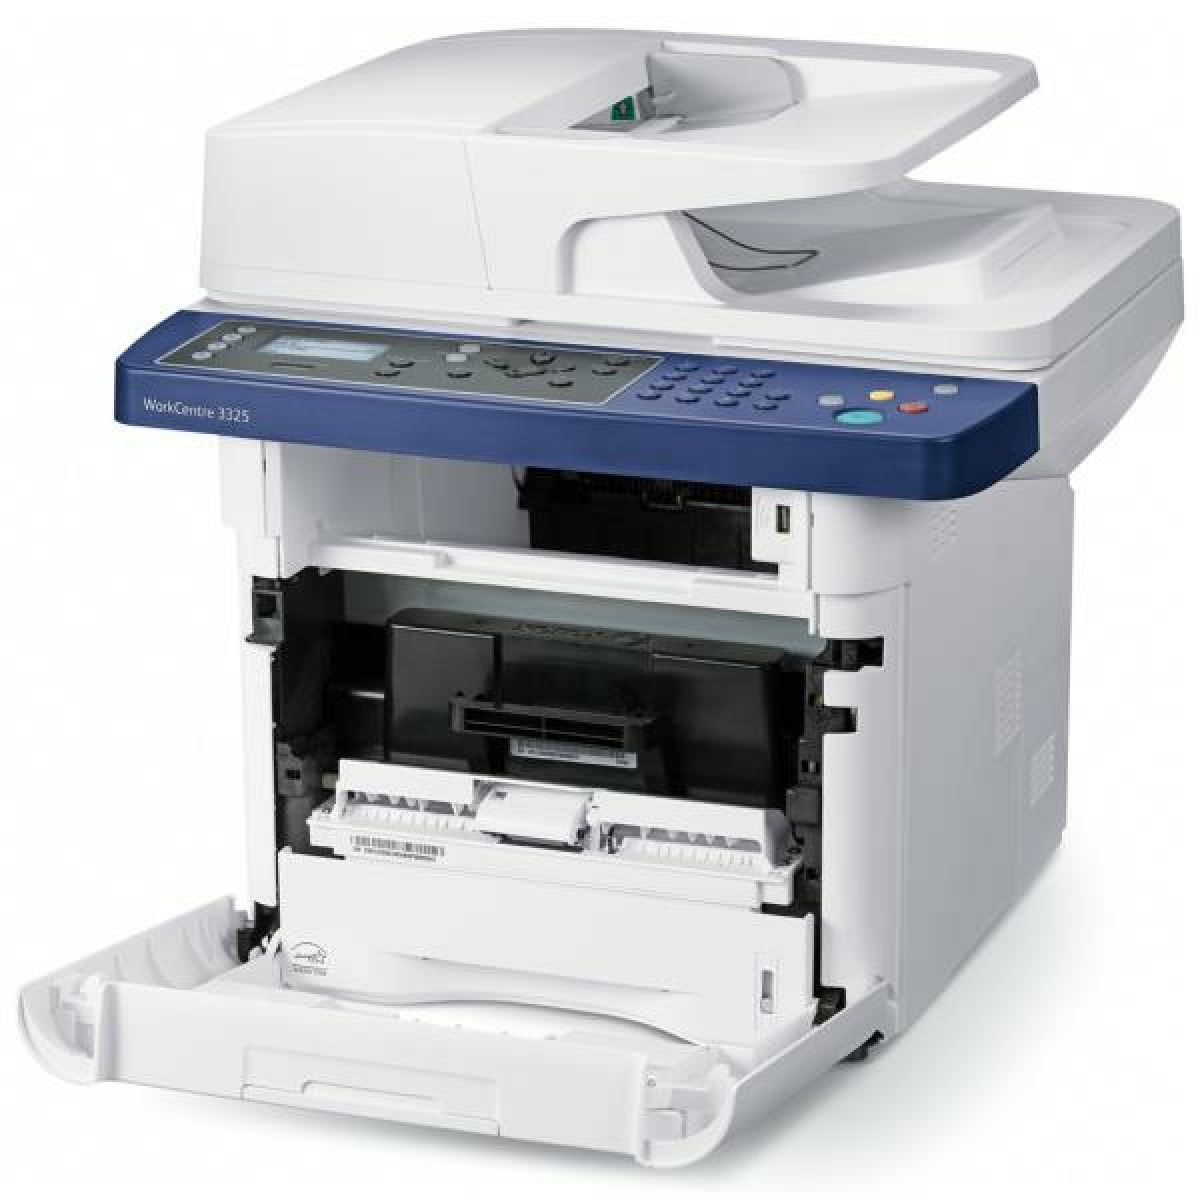 All in one Printer Xerox 3325 Used A Ethernet Rj-11 Usb &lt;150K Pages A4 A5 B/W Laser-Printer LOC 2&quot;